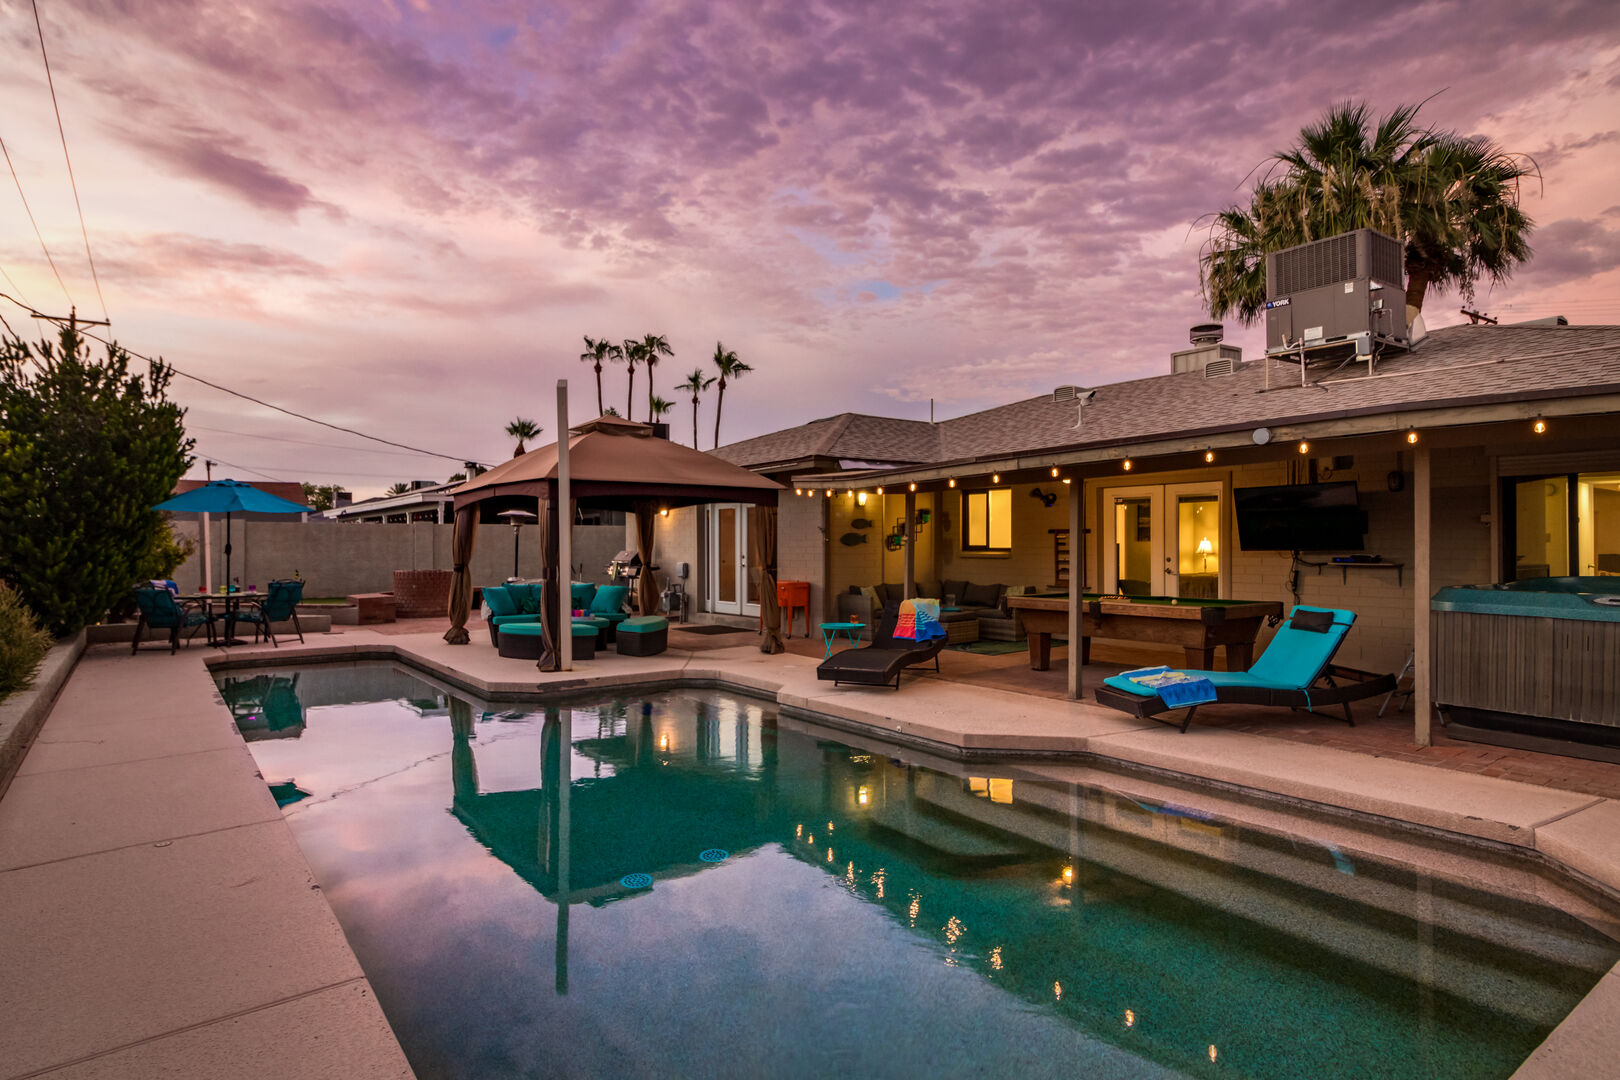 Pool view at sunset at one of our Scottsdale Villas